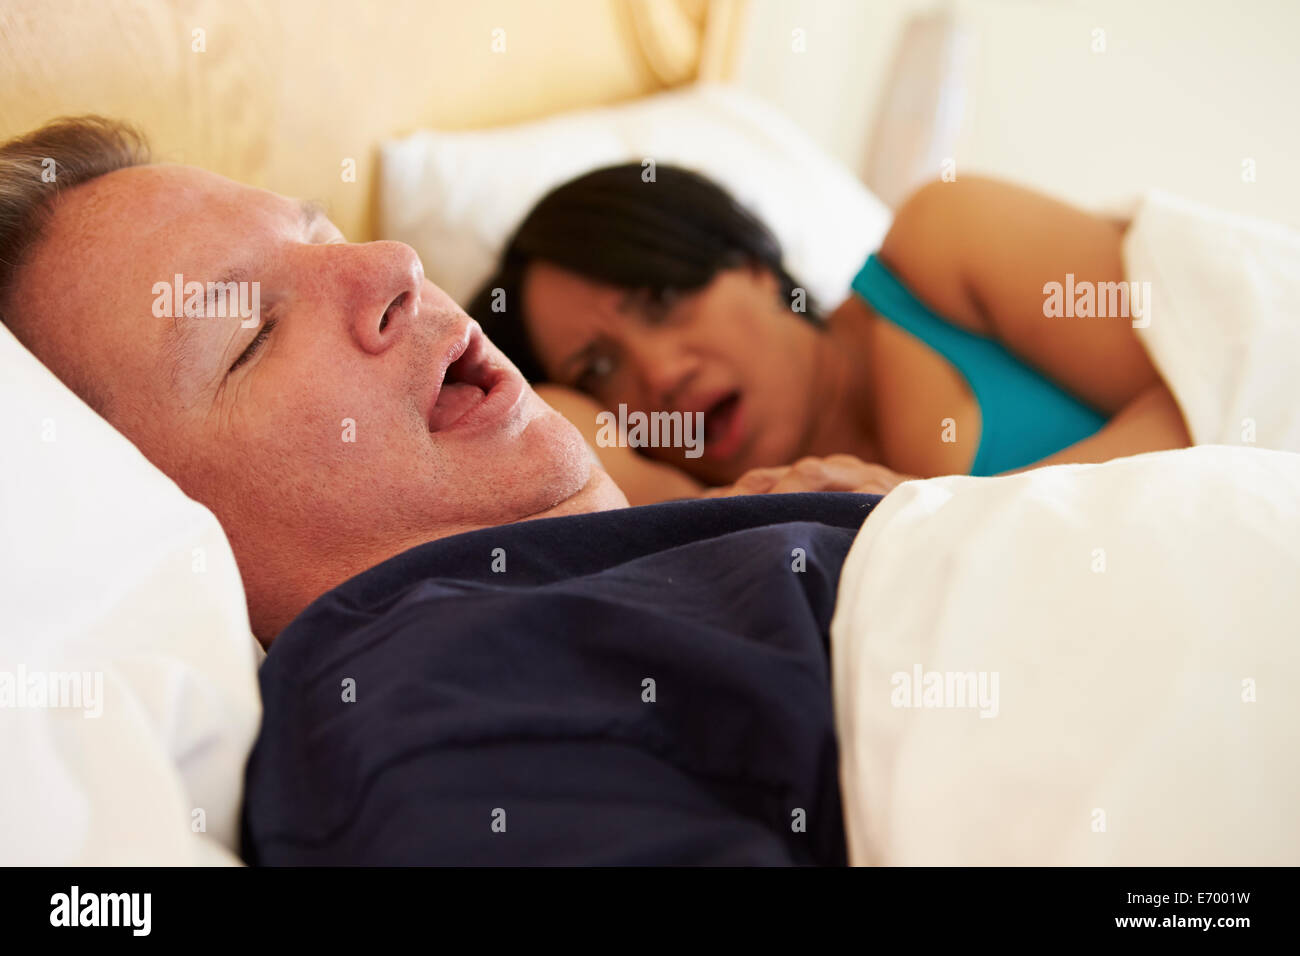 Couple Asleep In Bed With Man Snoring Stock Photo